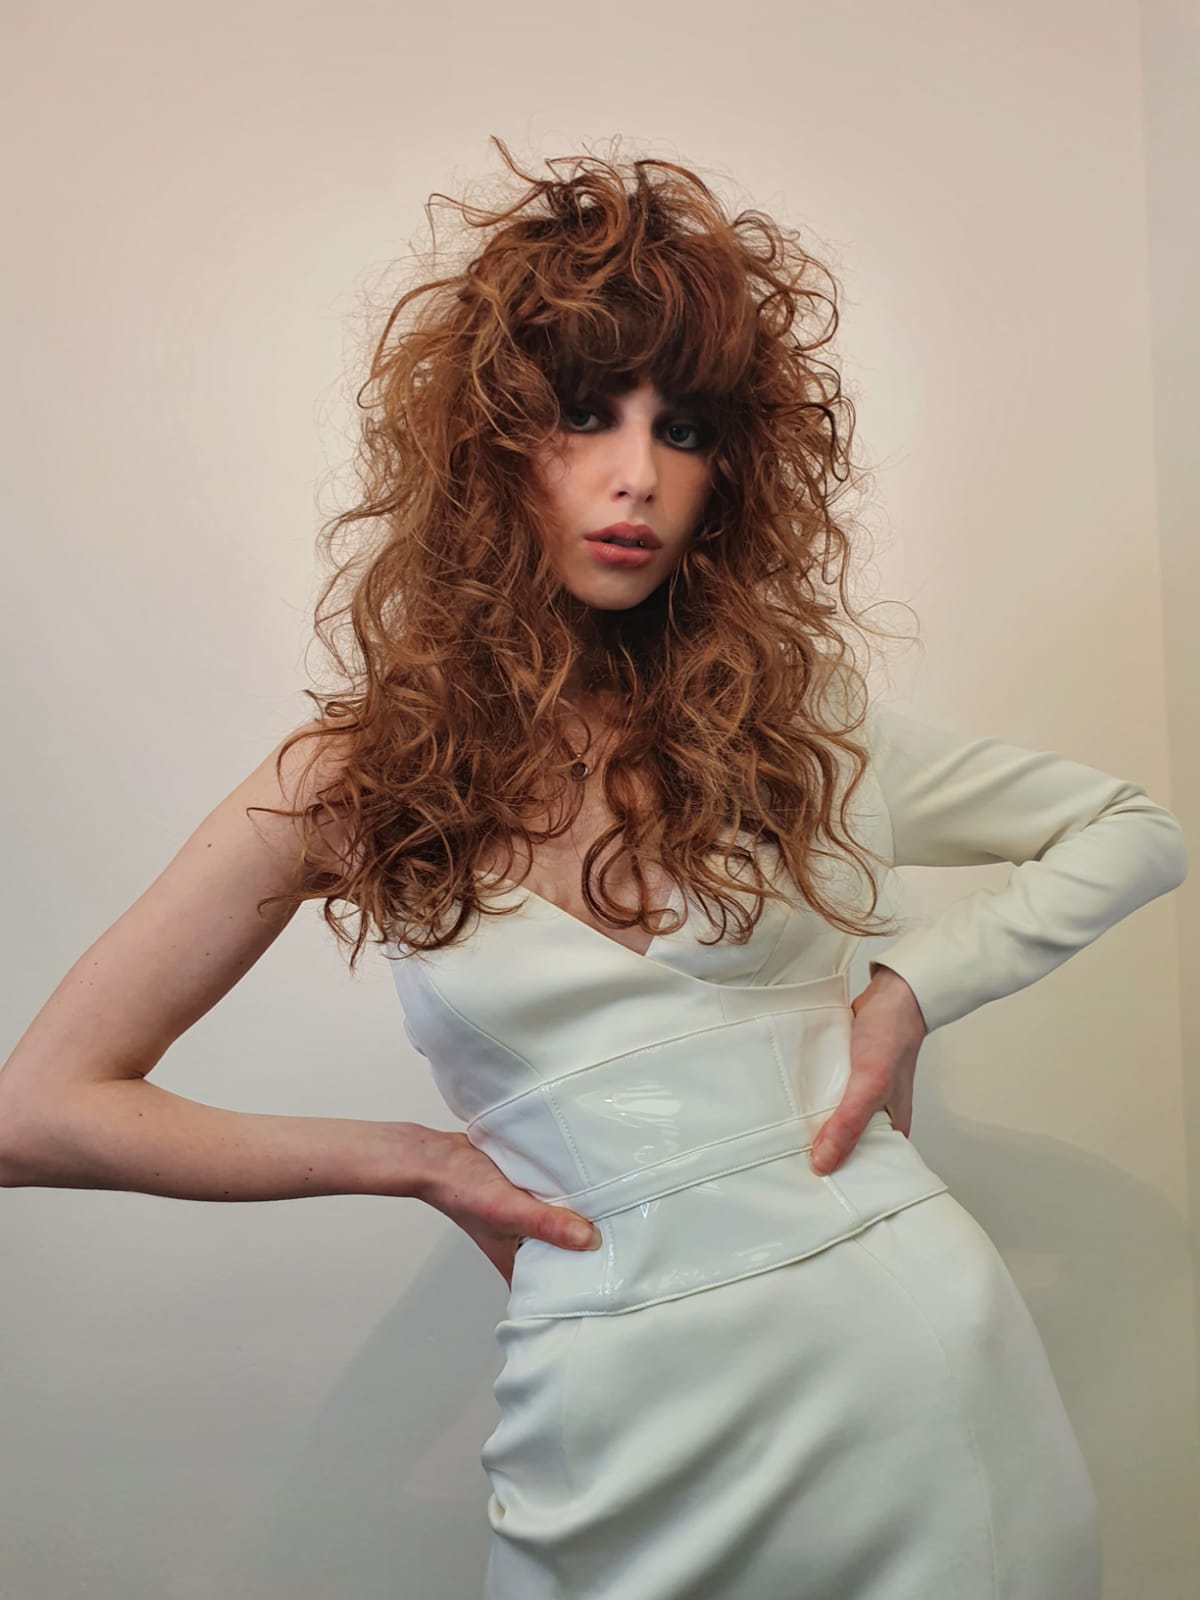 Get the dream curls look with jake unger and warren boodaghian